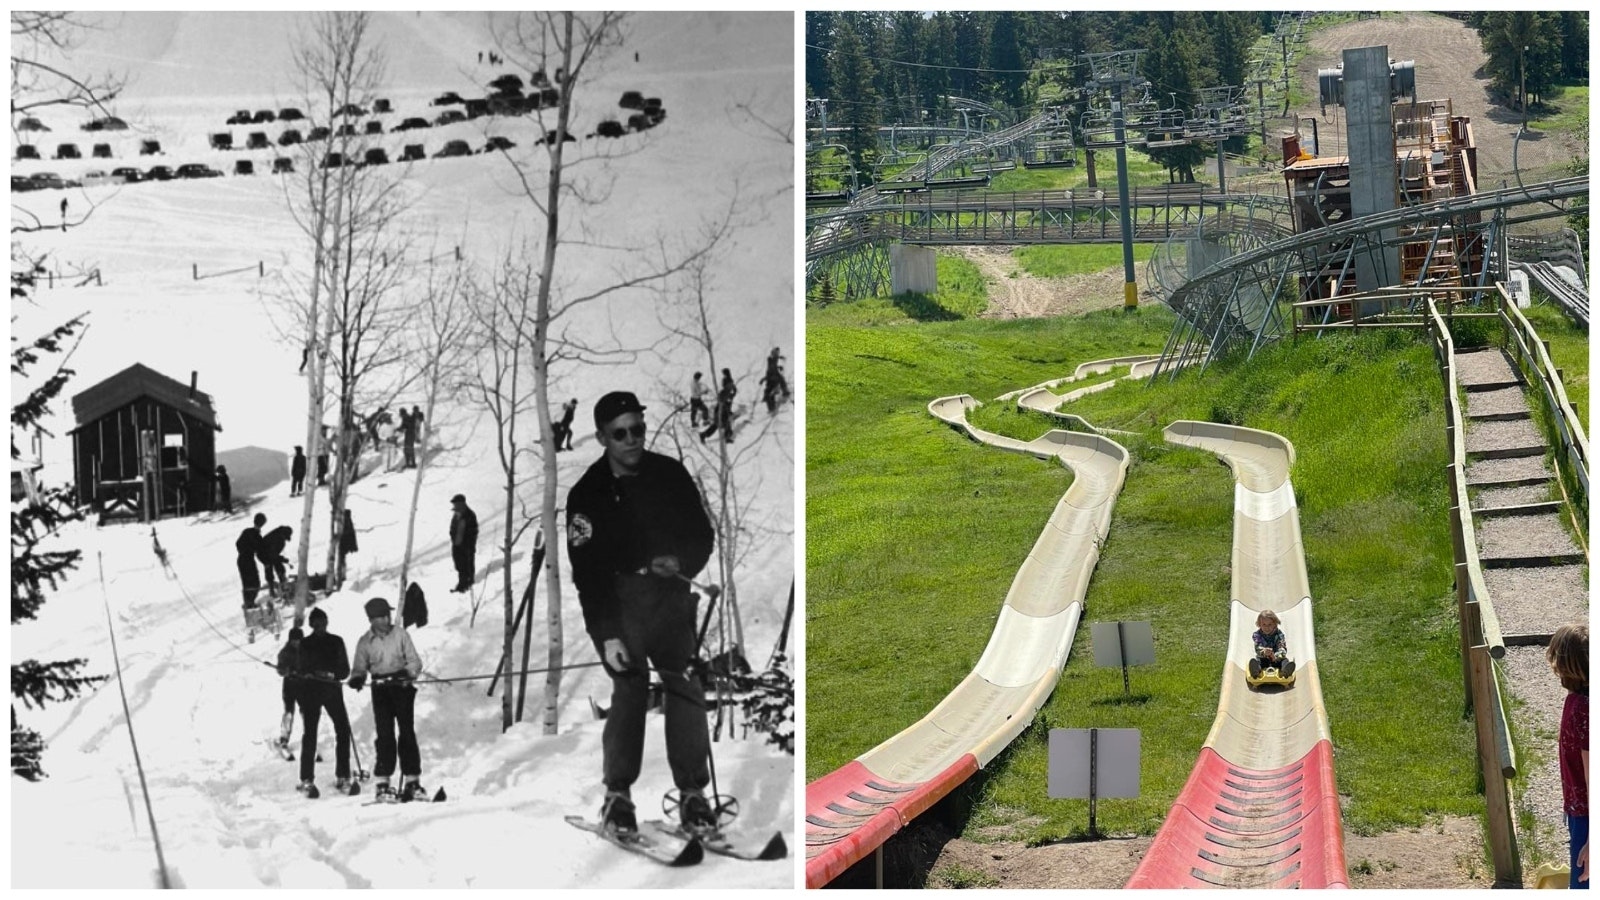 Snow King has come a long way from the Old Man’s Flats rope tow, he first cable tow on the mountain that opened in 1940, left. Now it has multiple attractions, right.